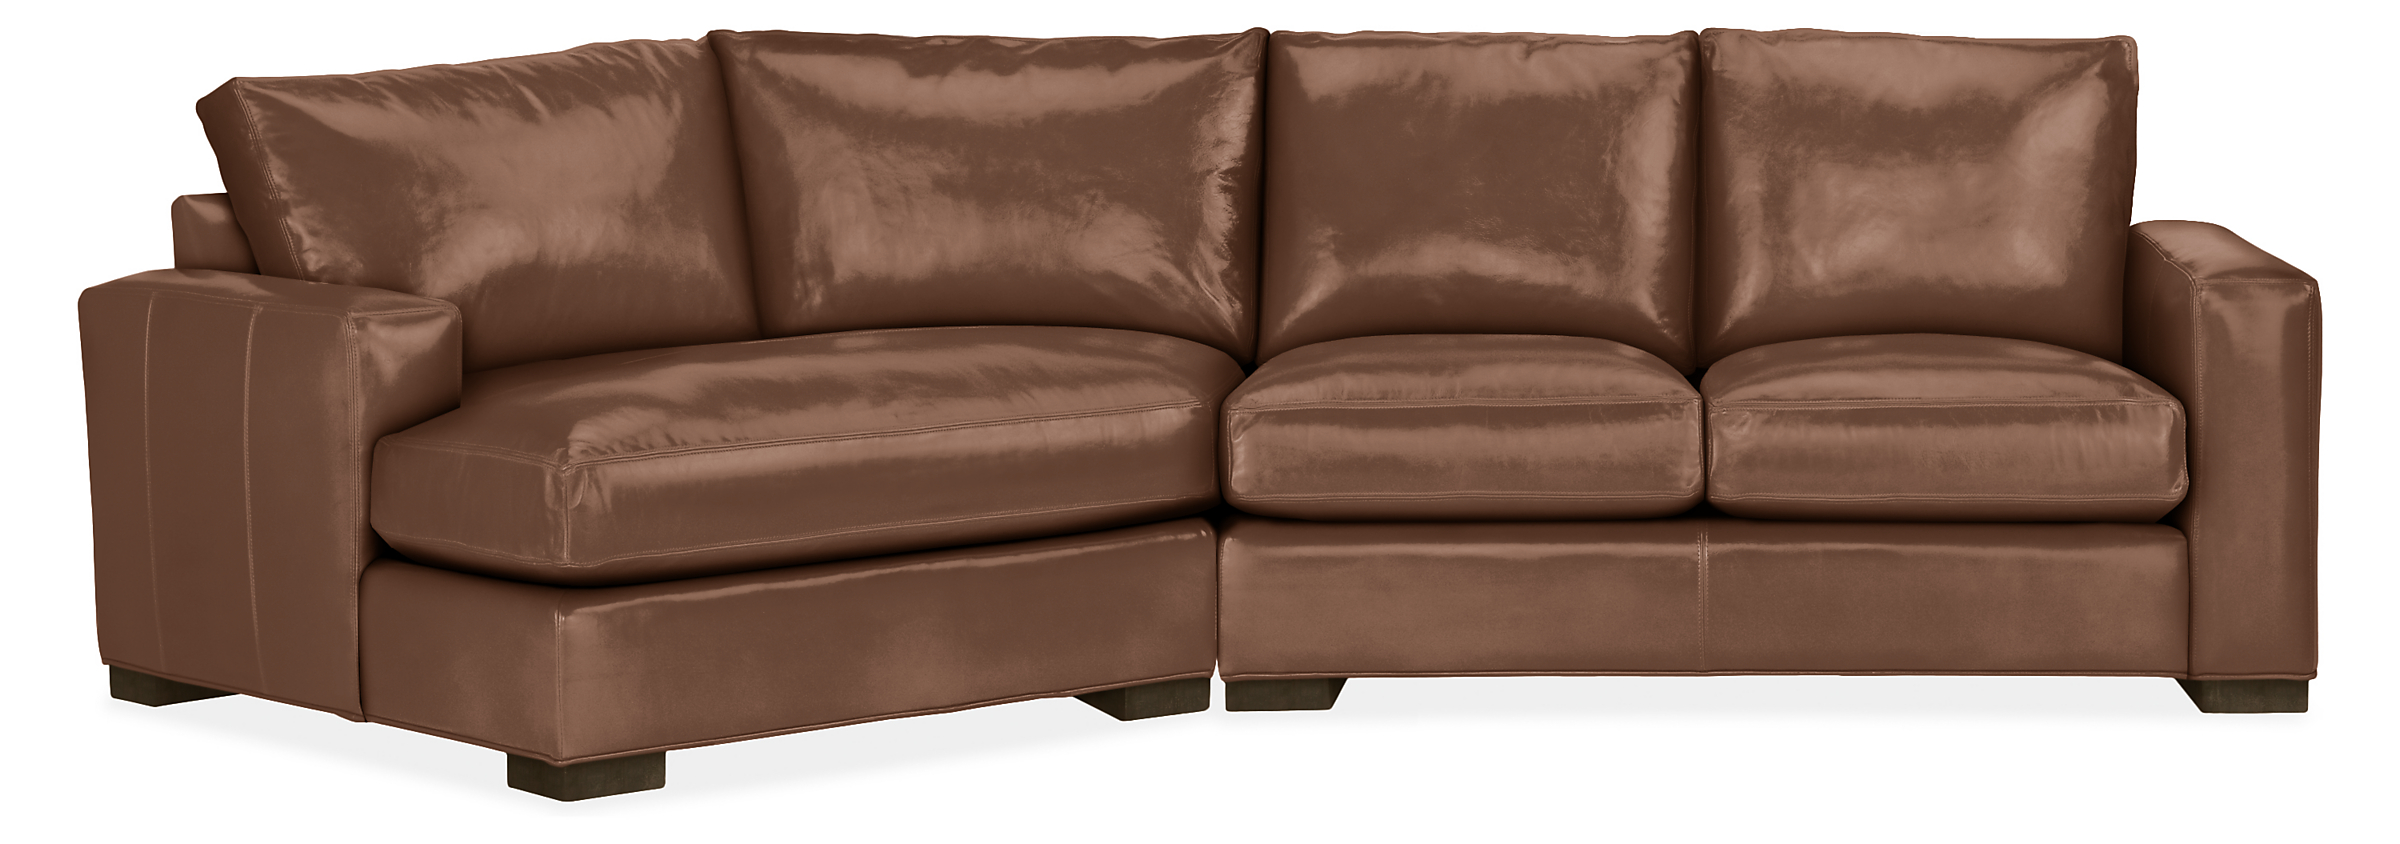 Metro 121" Sofa with Left-Arm Angled Chaise